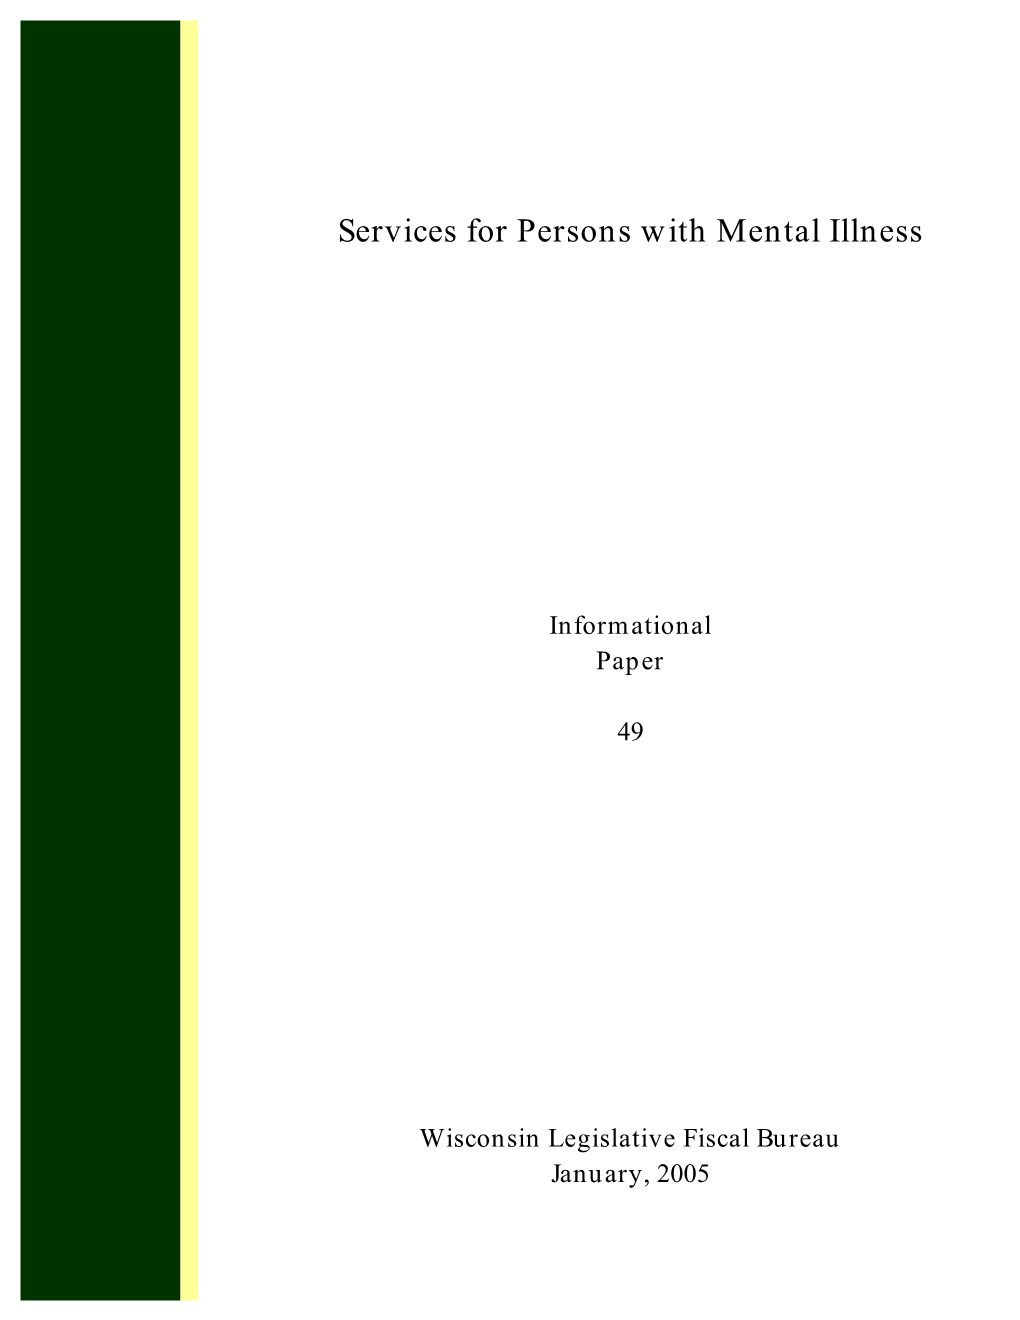 Services for Persons with Mental Illness